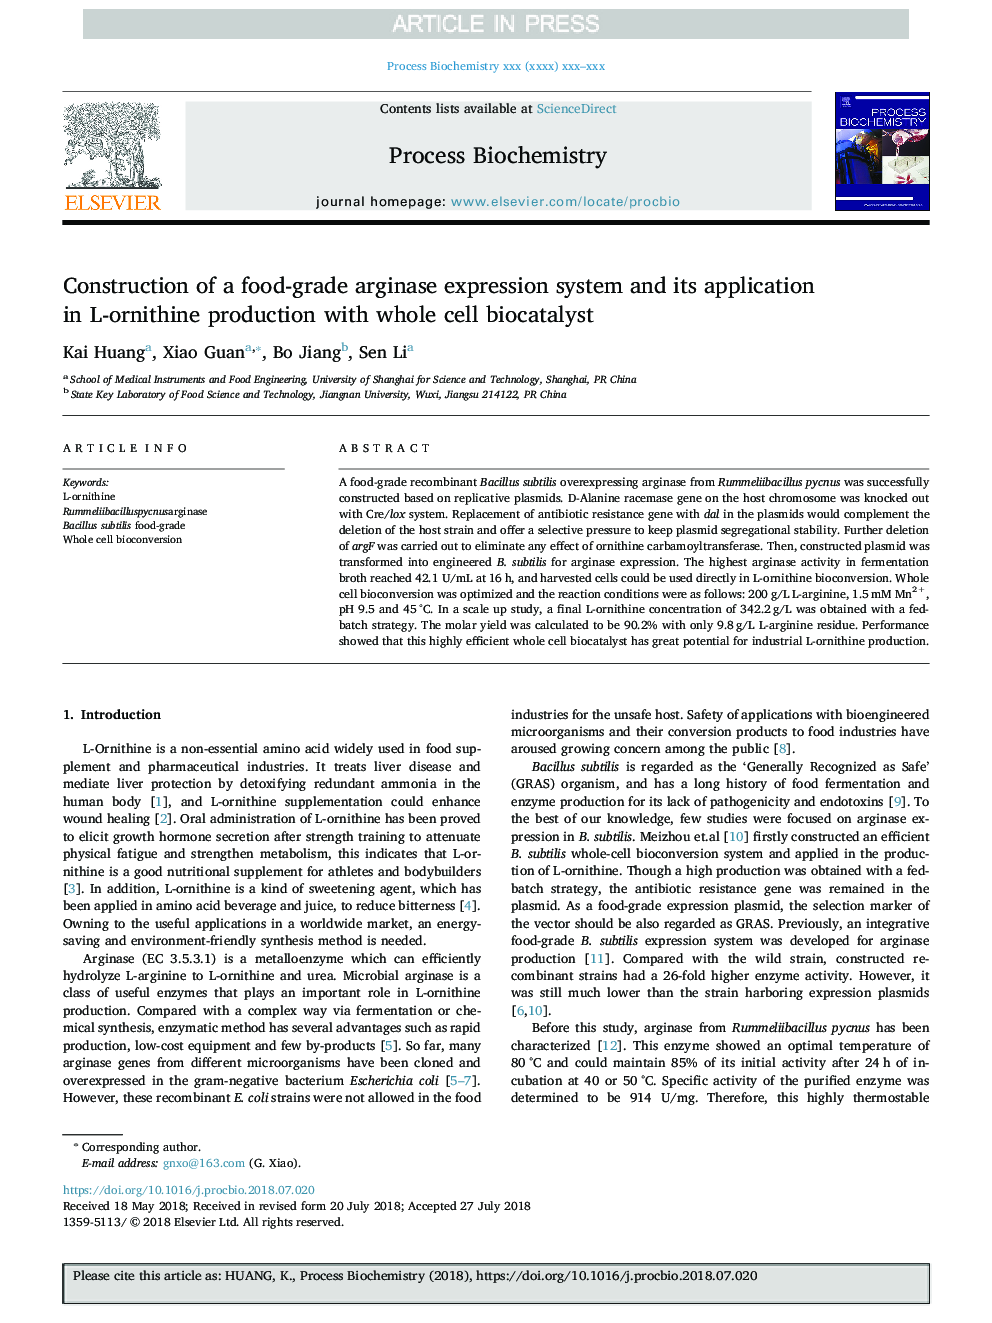 Construction of a food-grade arginase expression system and its application in L-ornithine production with whole cell biocatalyst